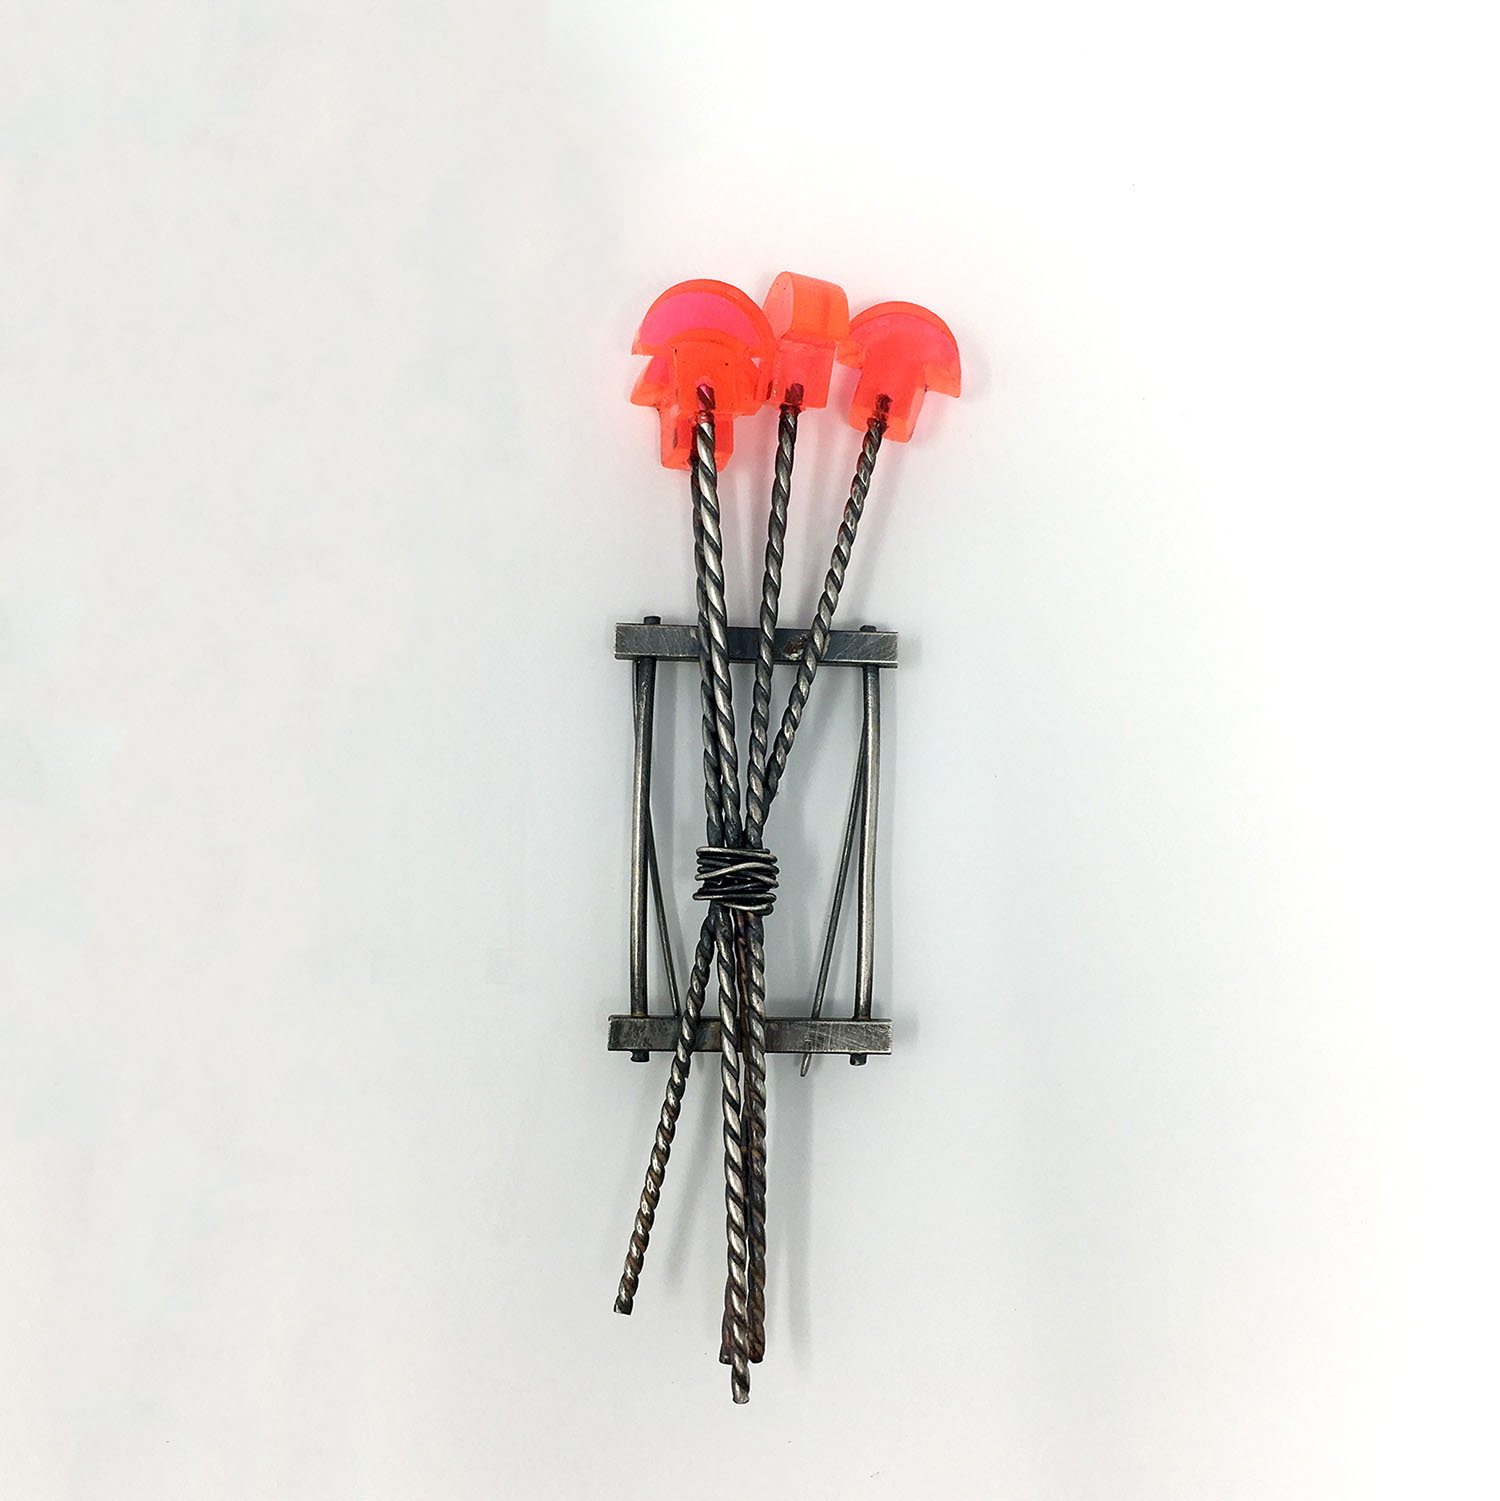 construction jewelry pink caps clustered pin by Natalie Macellaio